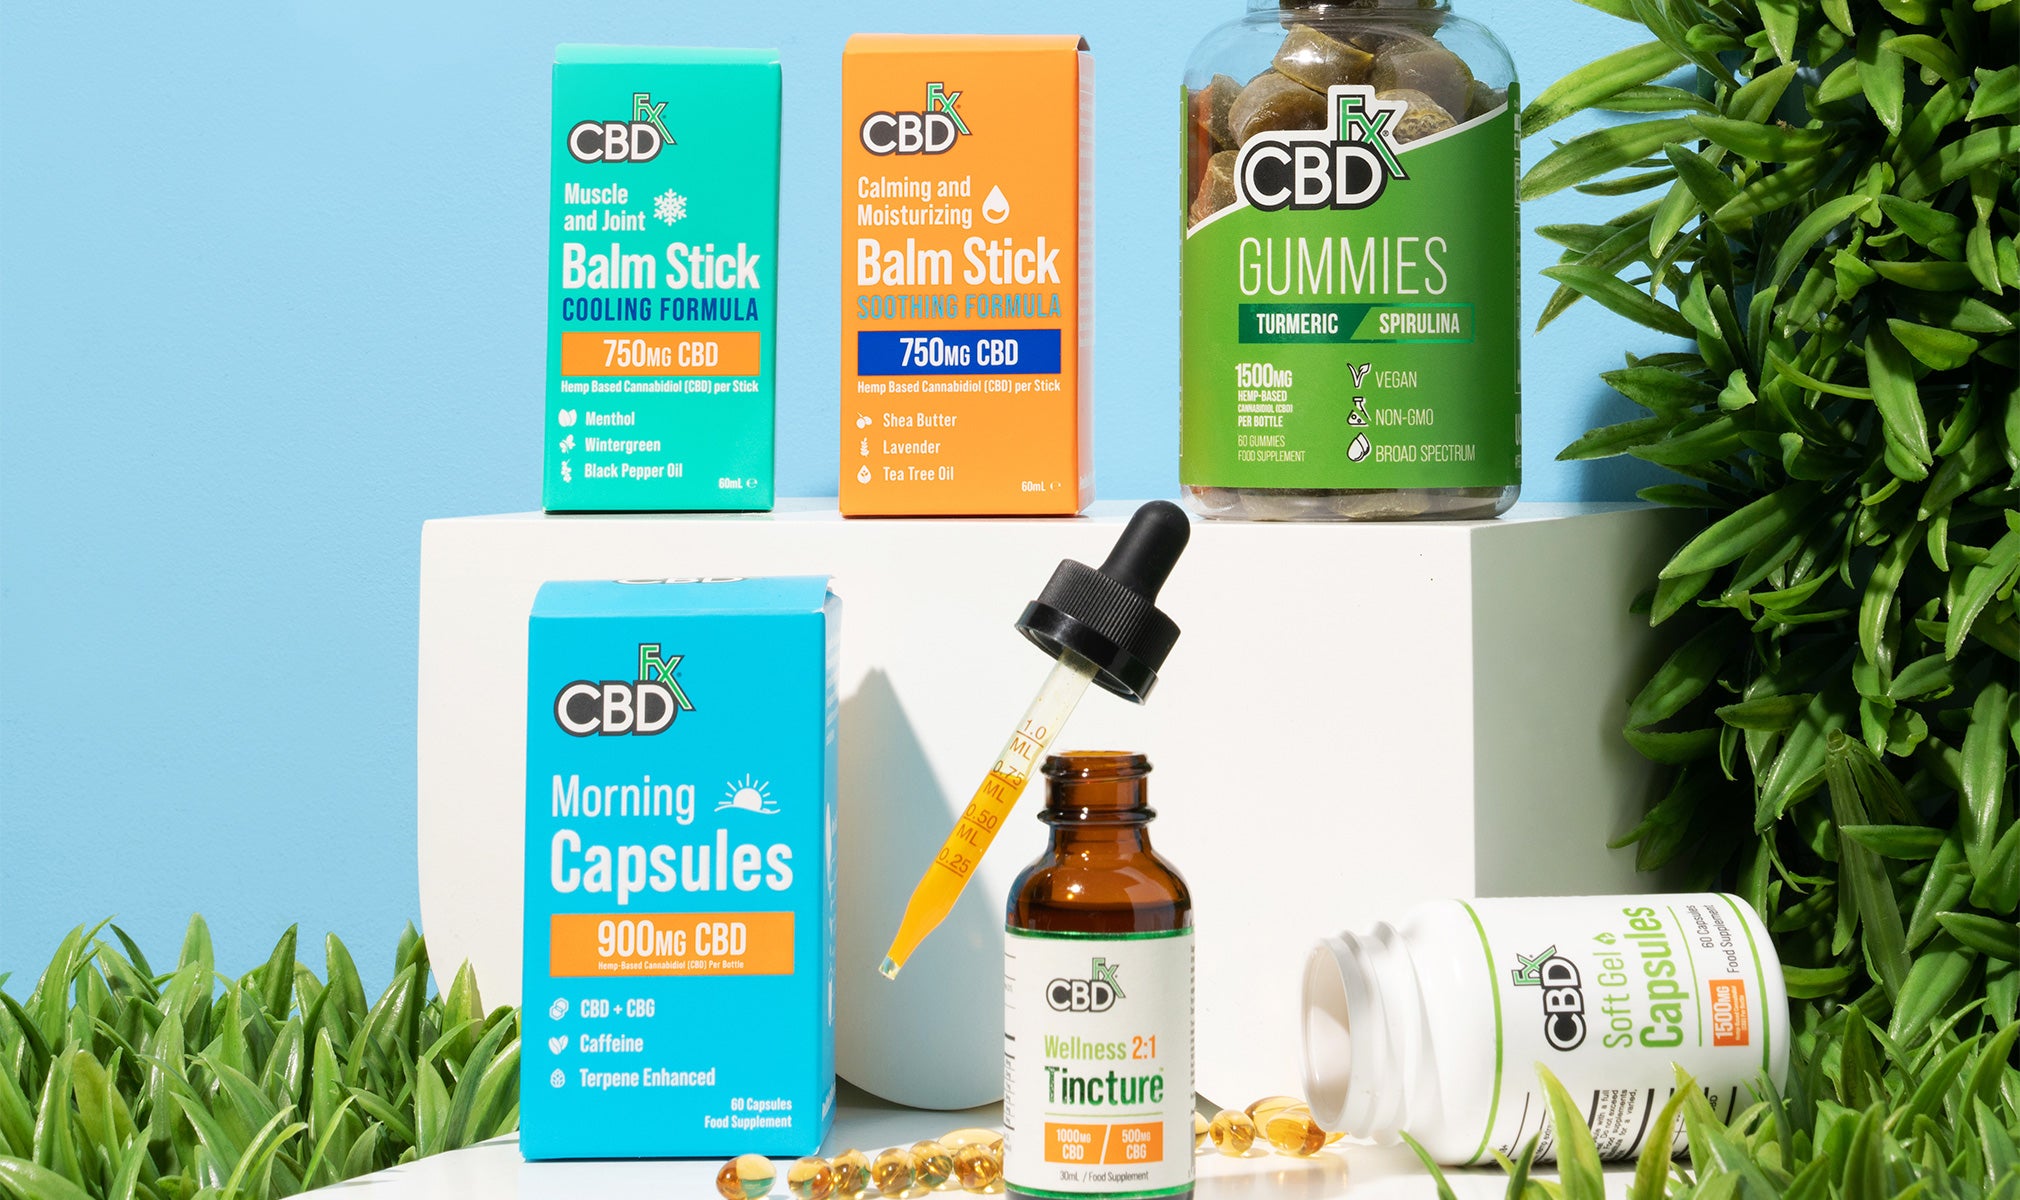 A Beginner’s Guide to CBD